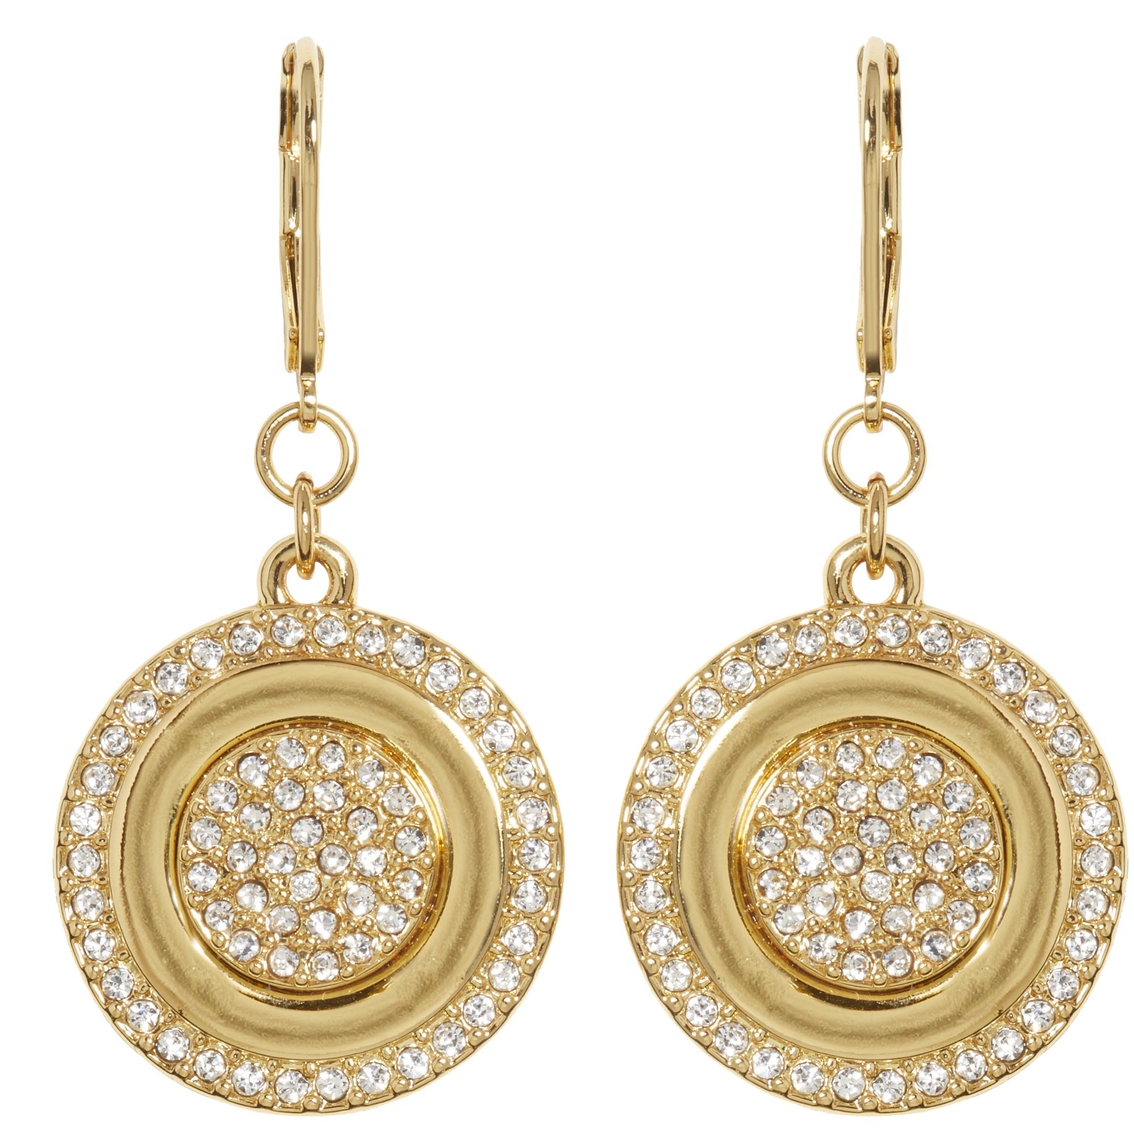 Vince Camuto Goldtone Pave Crystal Disc Earring | Fashion Earrings ...